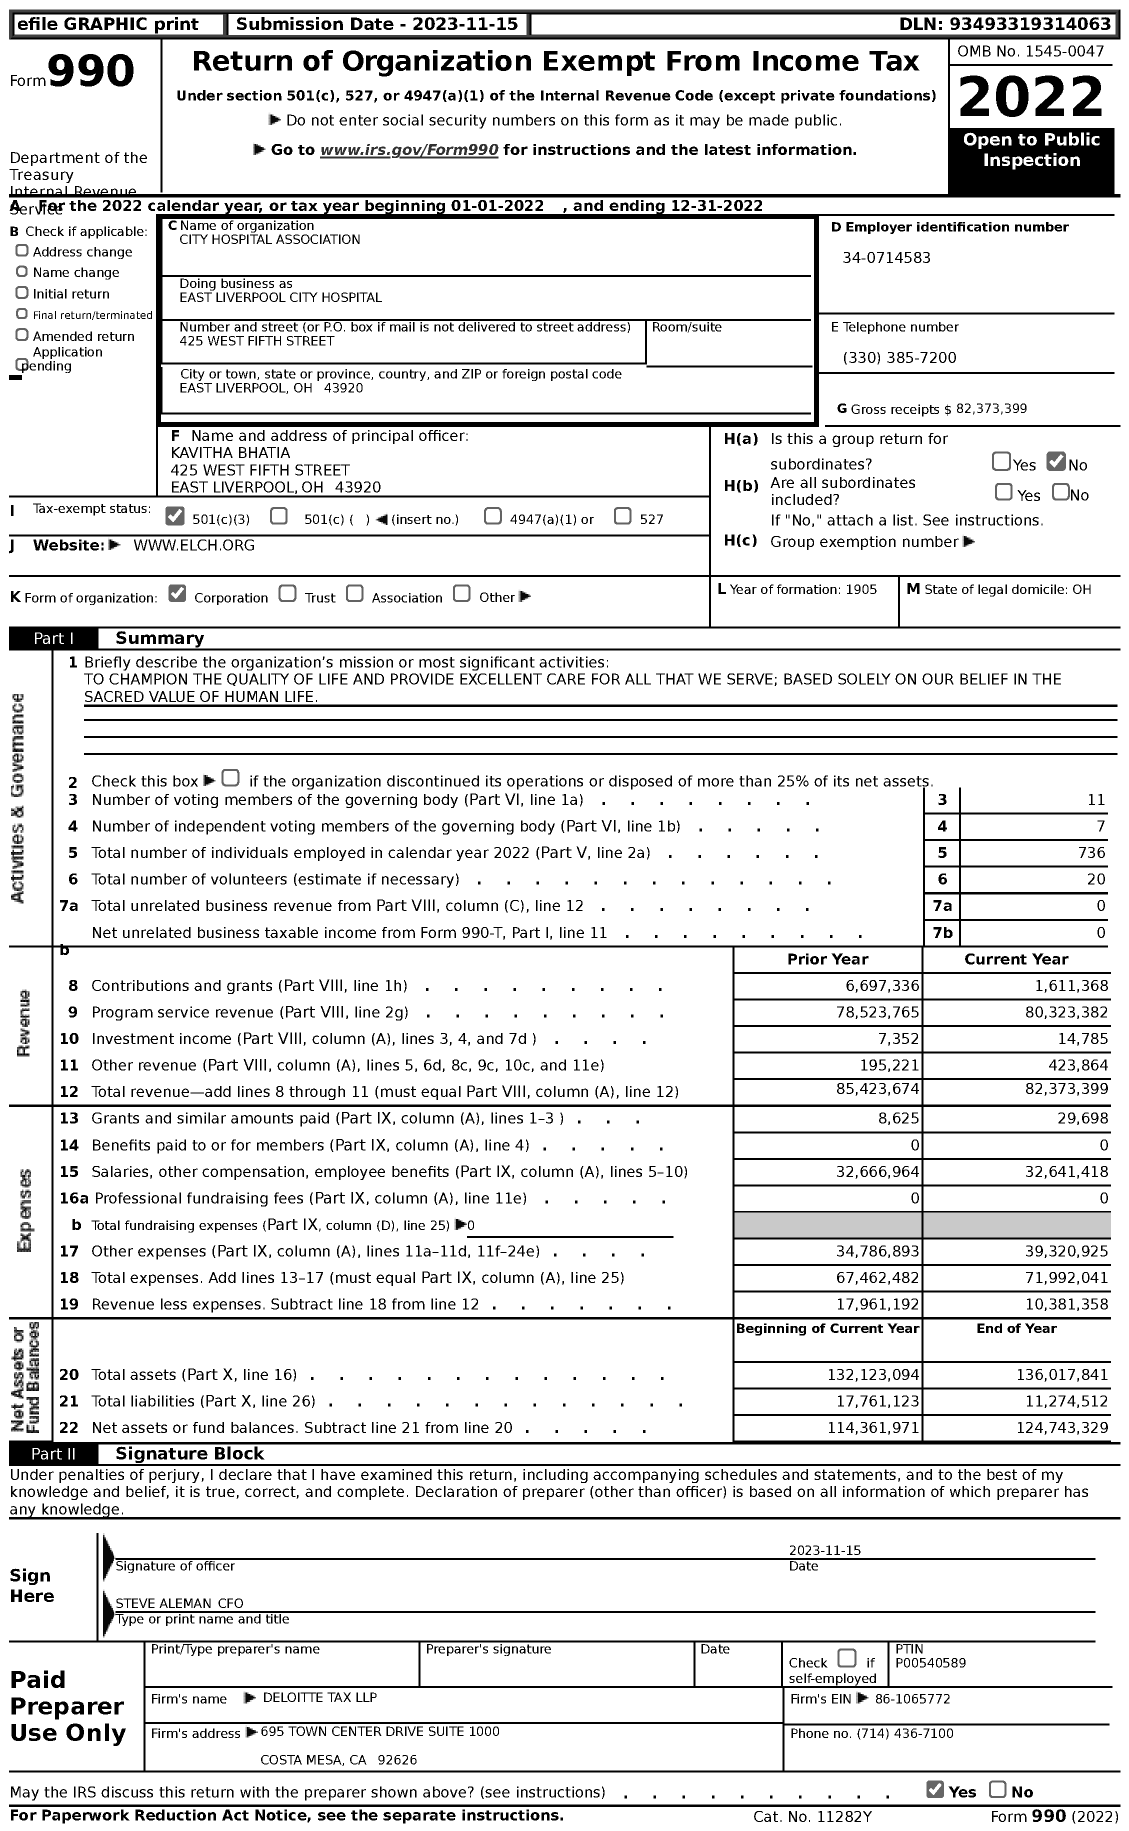 Image of first page of 2022 Form 990 for East Liverpool City Hospital (ELCH)